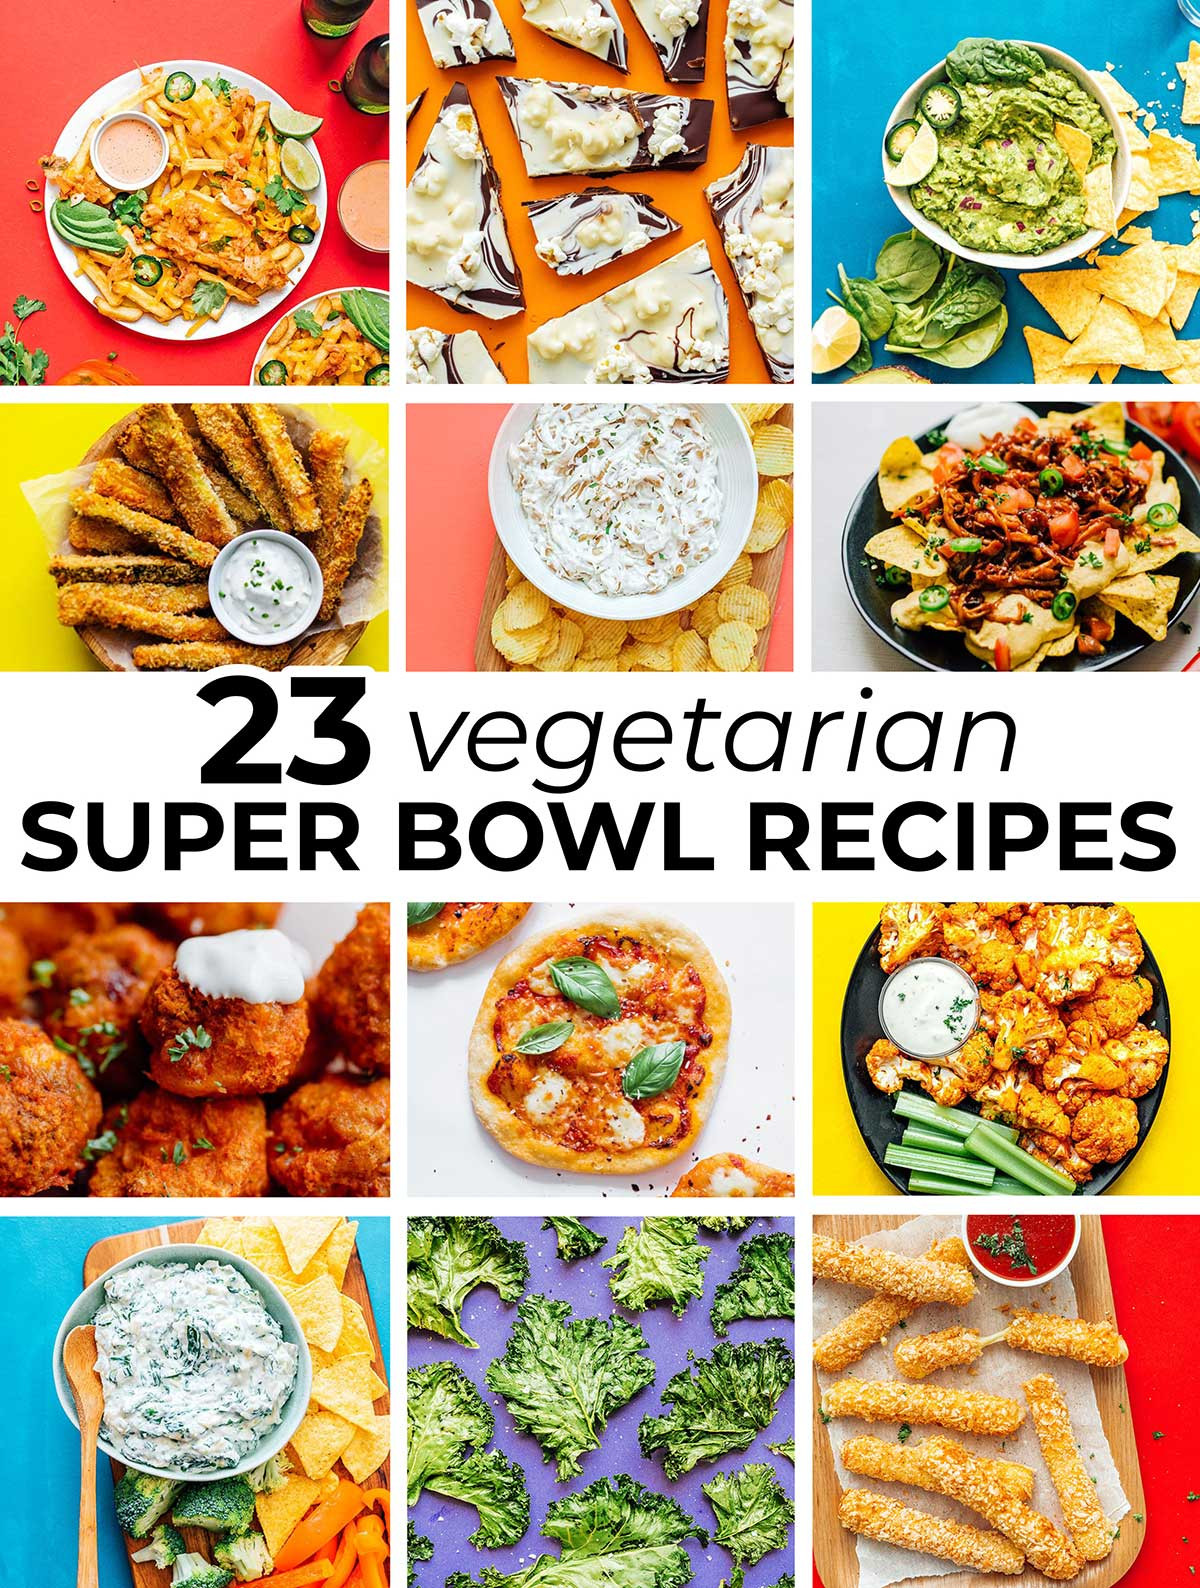 Vegetarian Super Bowl Recipes
 23 Ve arian Super Bowl Recipes that are better than the